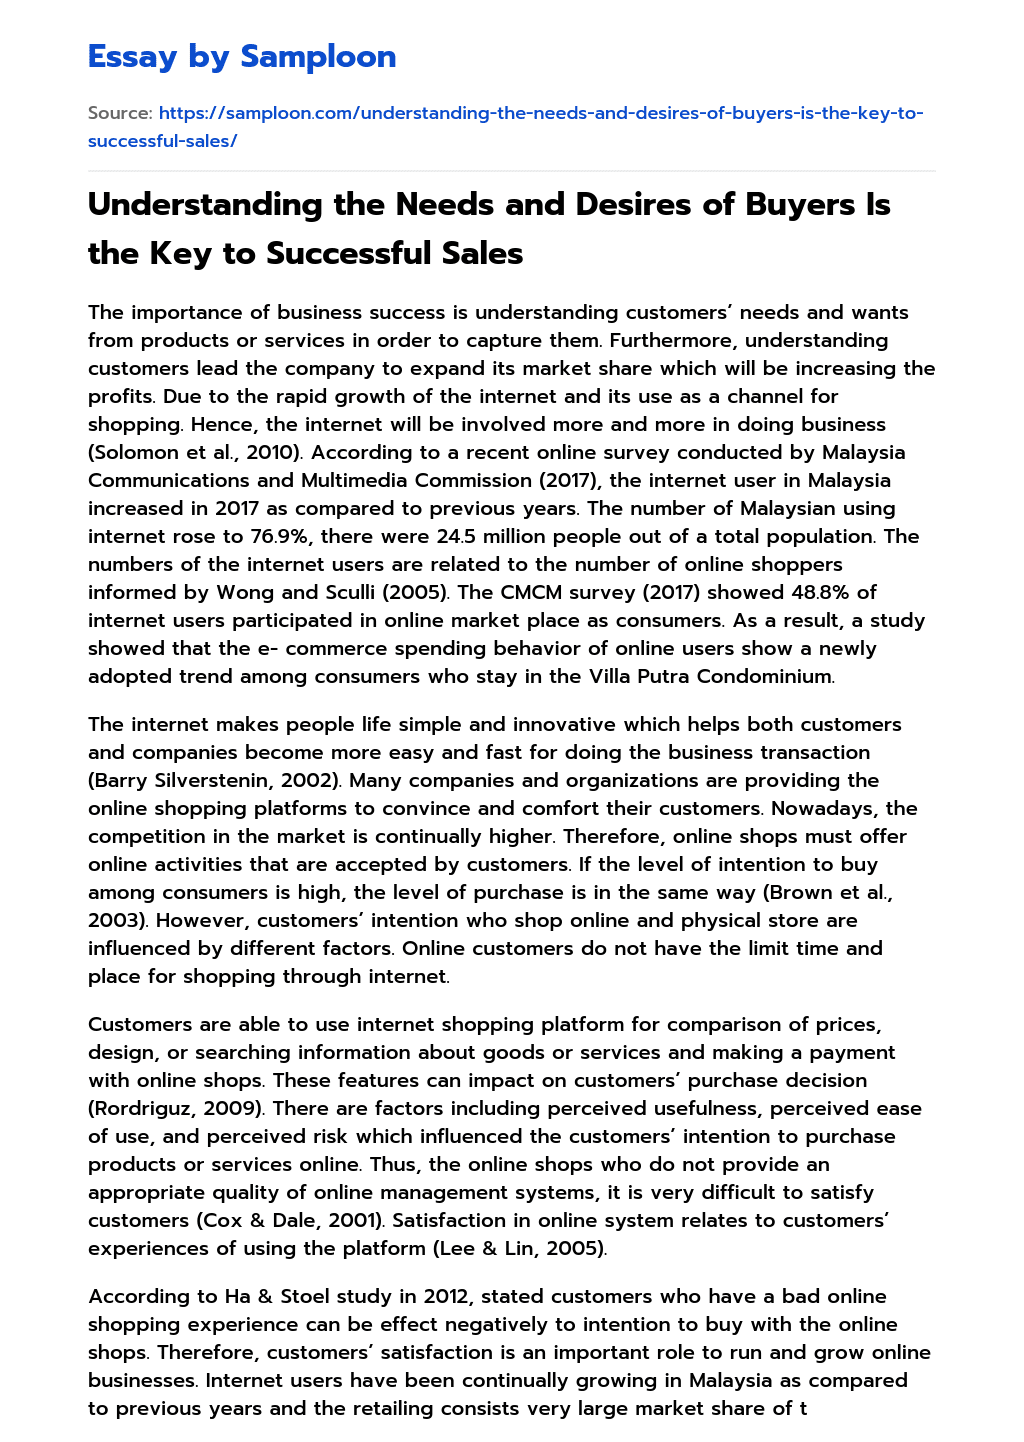 Understanding the Needs and Desires of Buyers Is the Key to Successful Sales essay